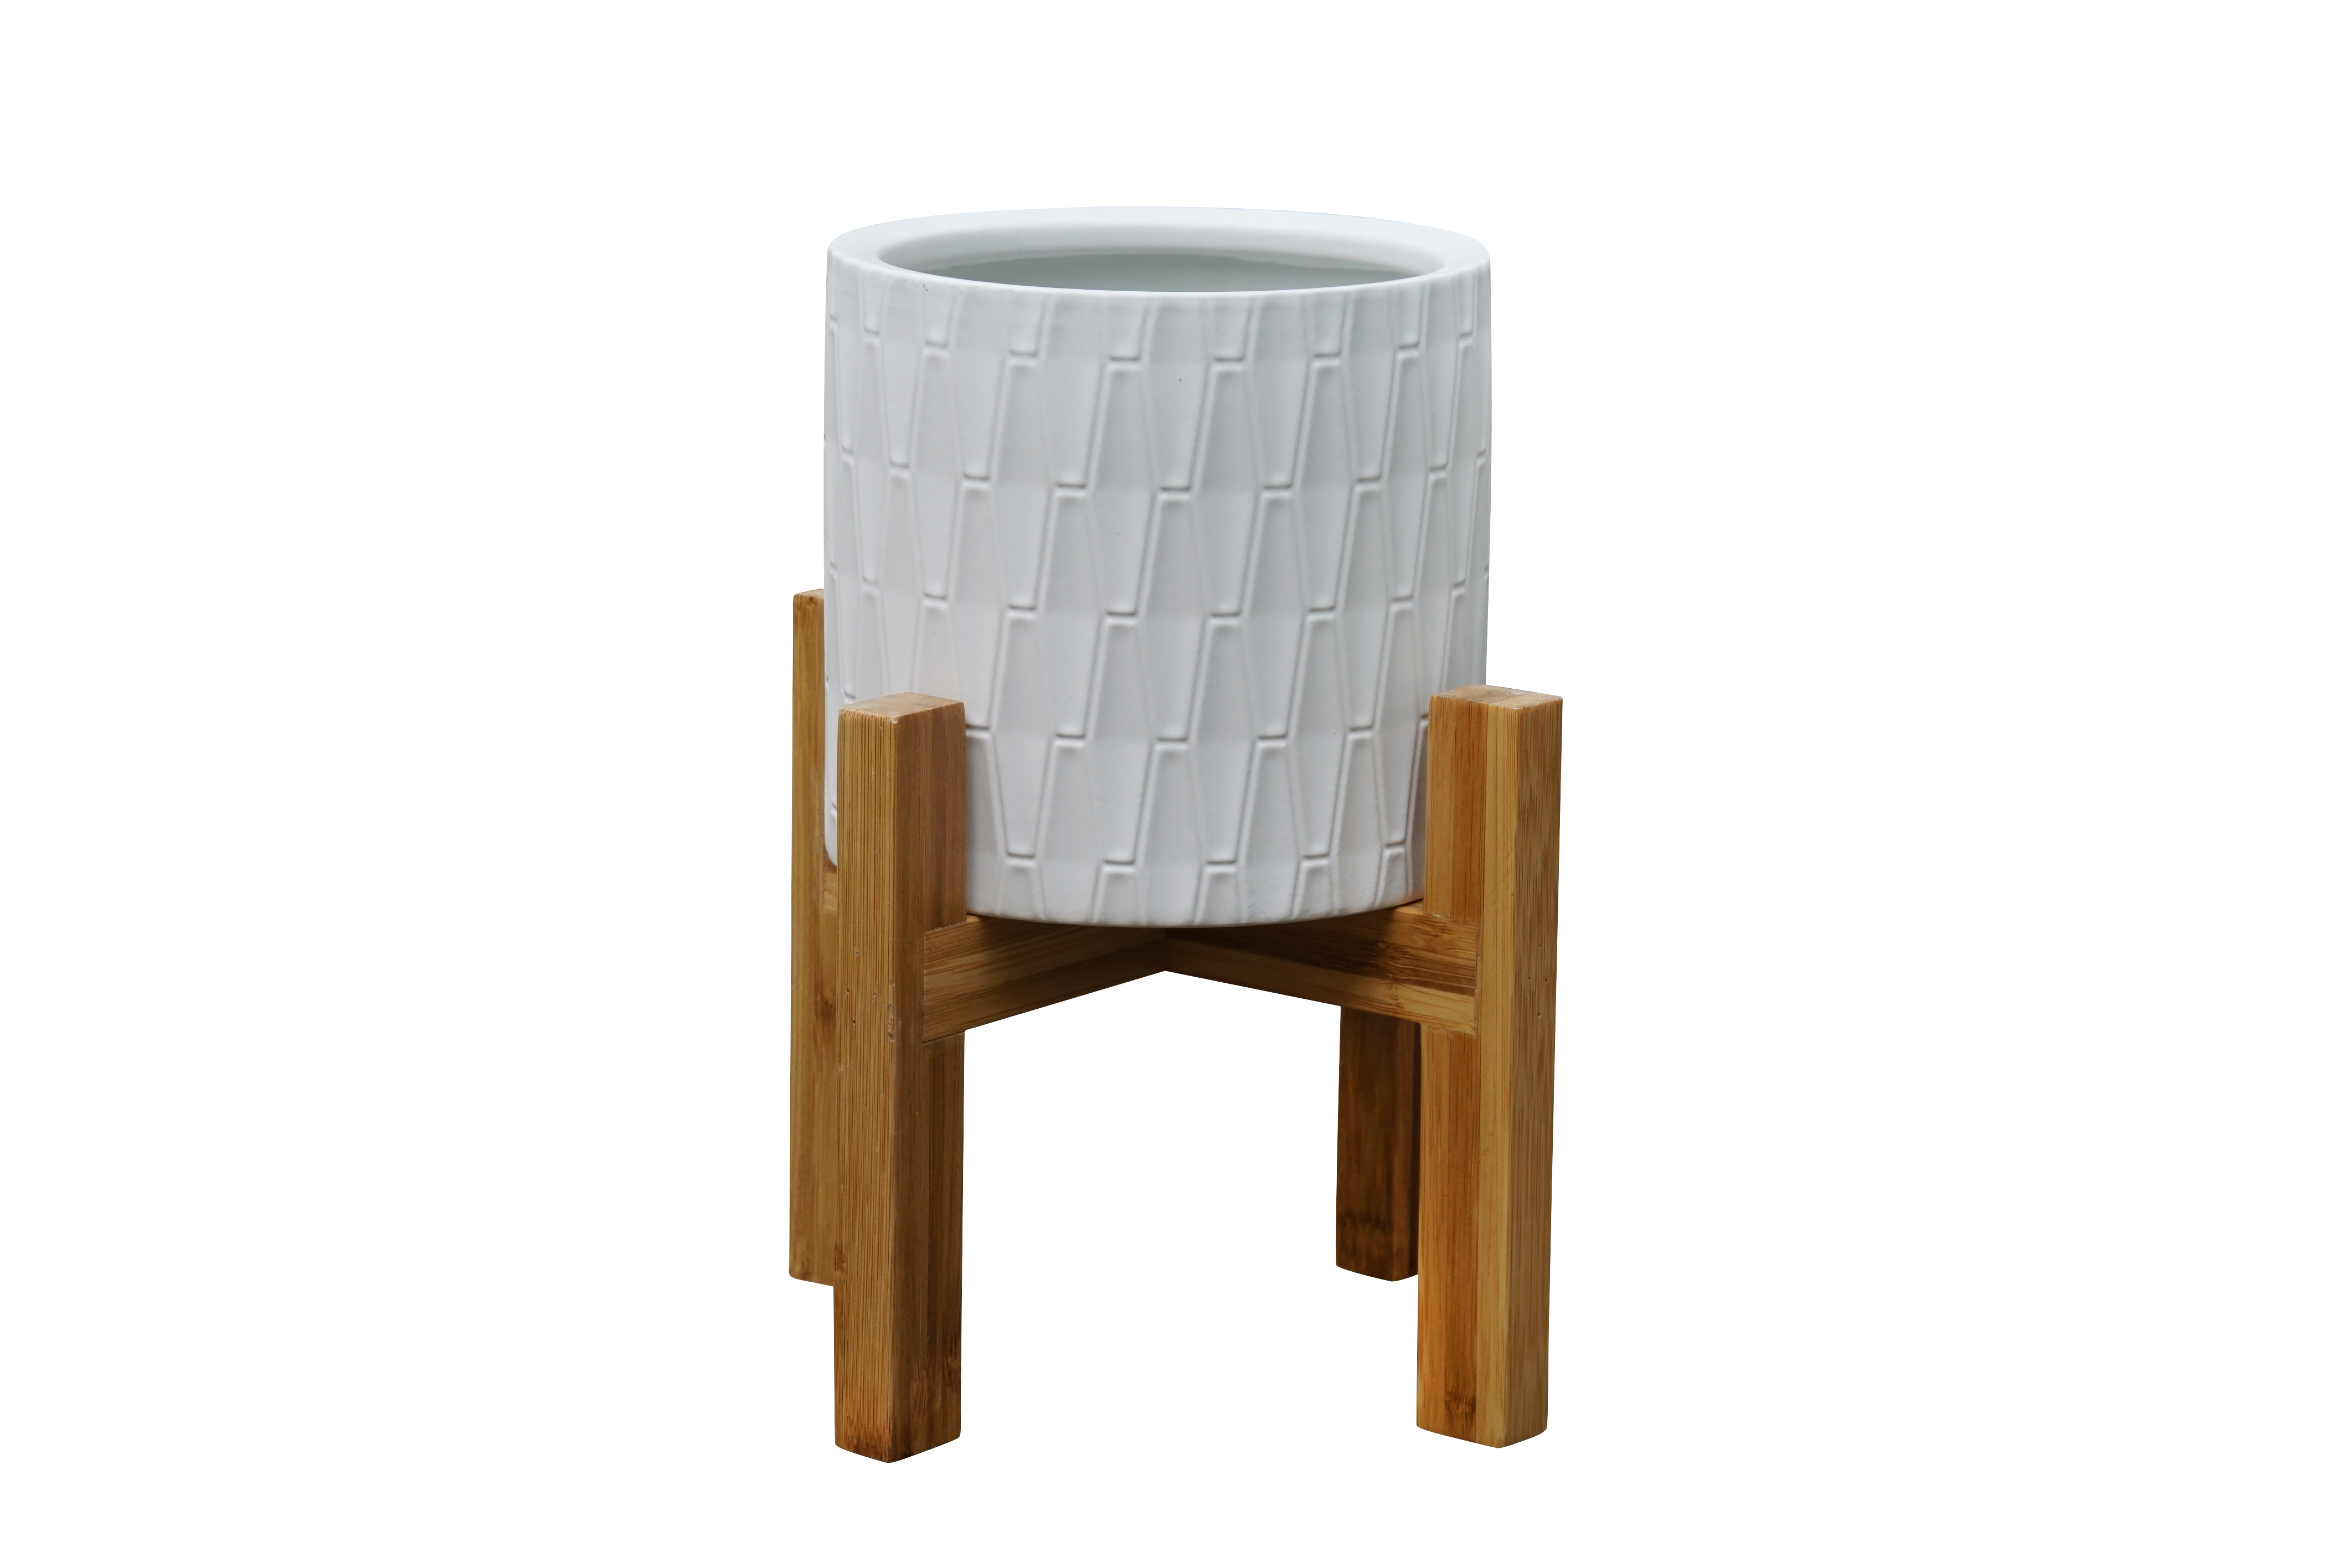 Better Homes & Gardens 6in Kennewick Ceramic Planter With Stand, White - image 5 of 8